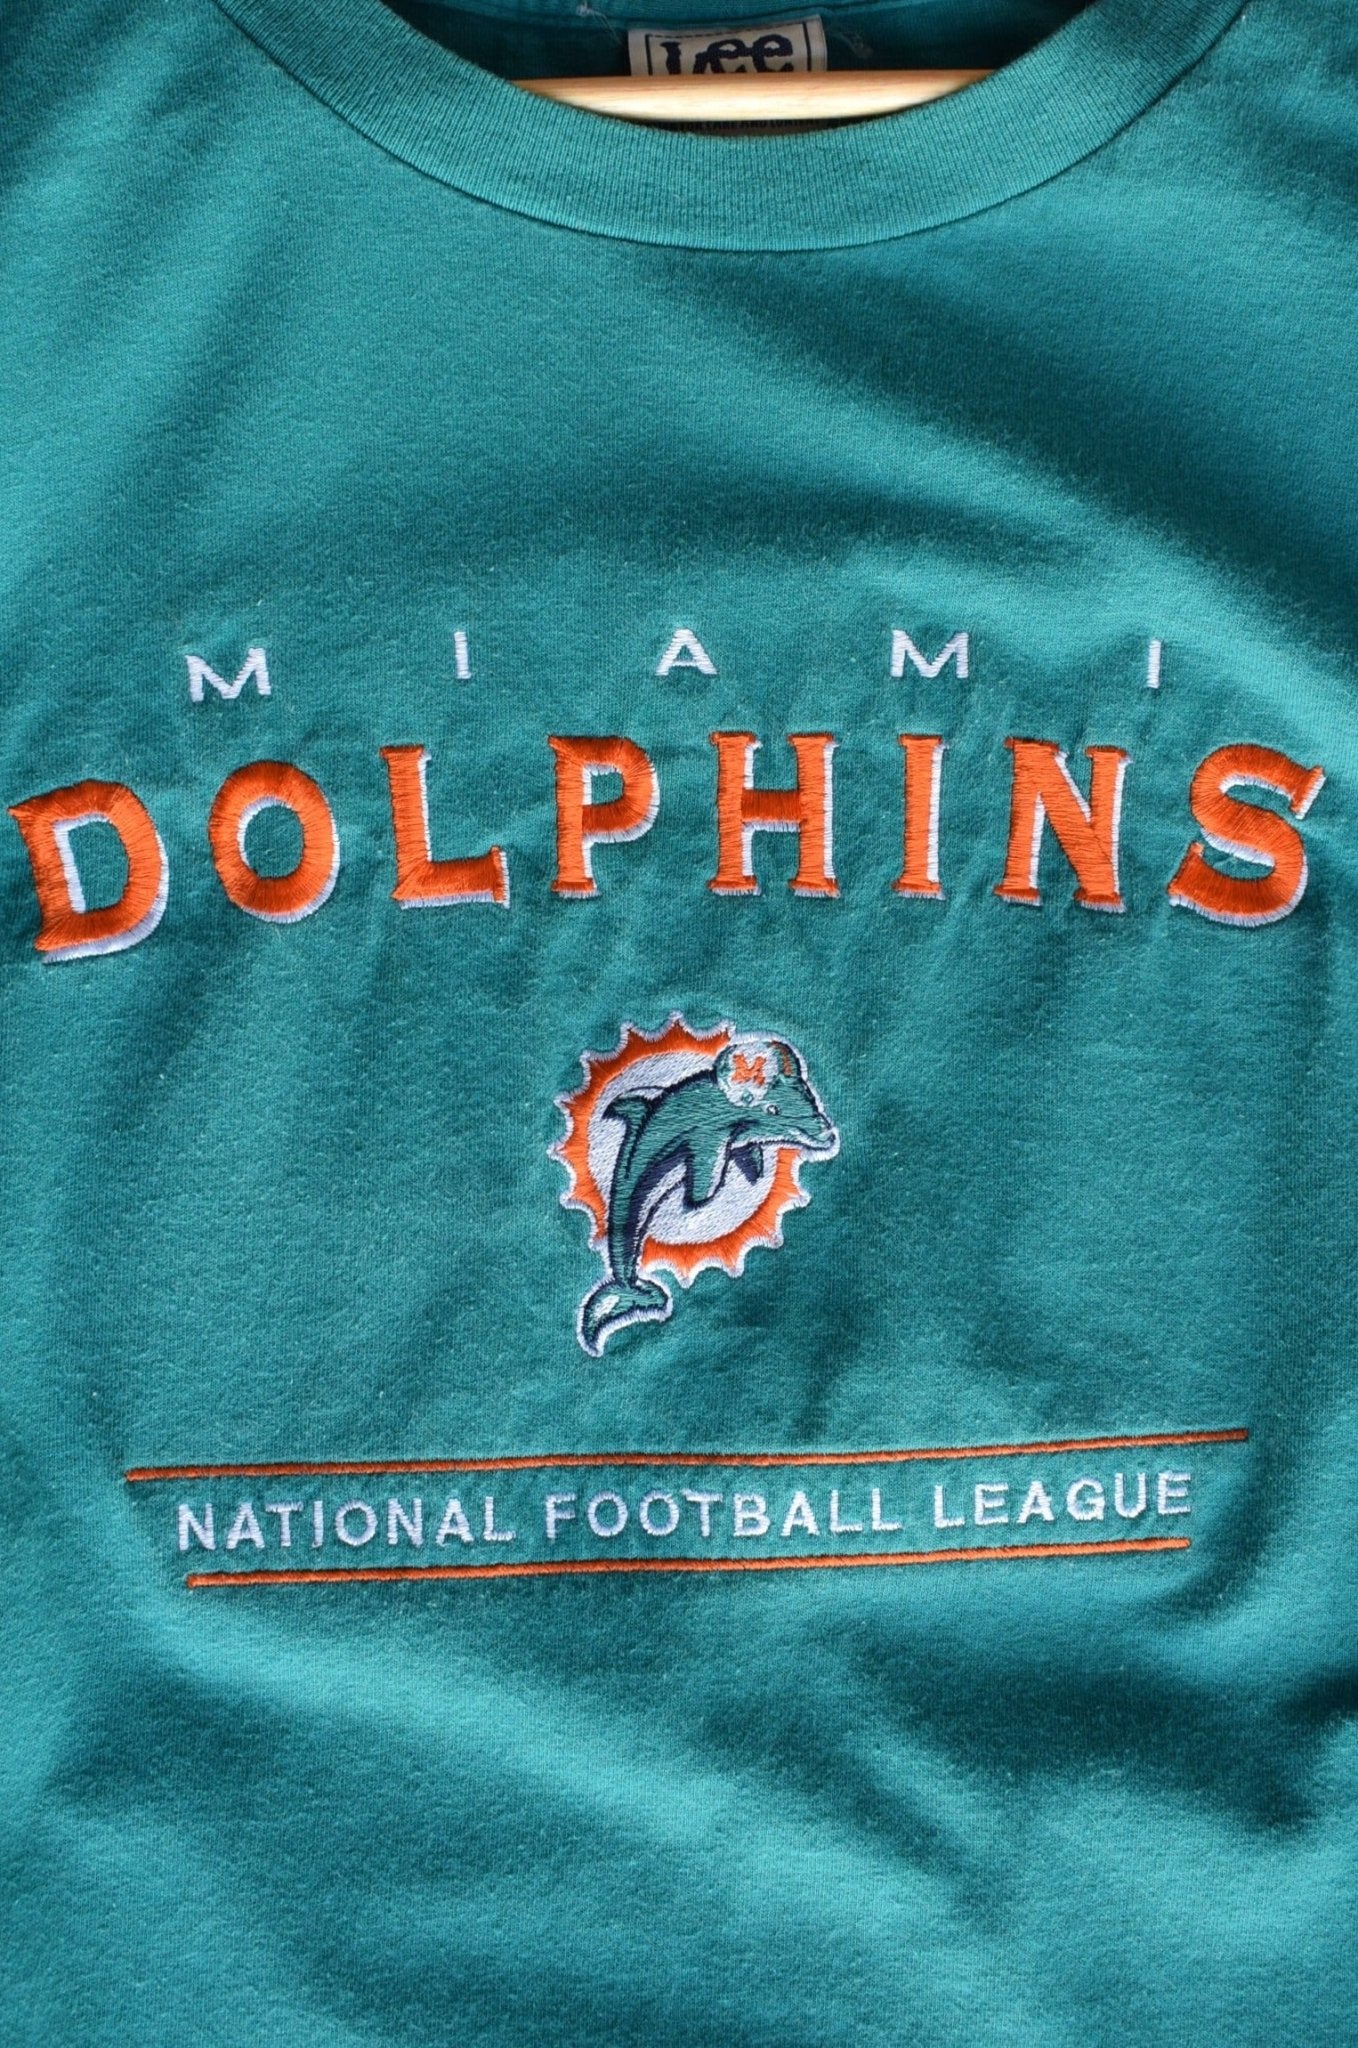 Vintage NFL Miami Dolphins Embroidered Tee (XXL) - Retrospective Store